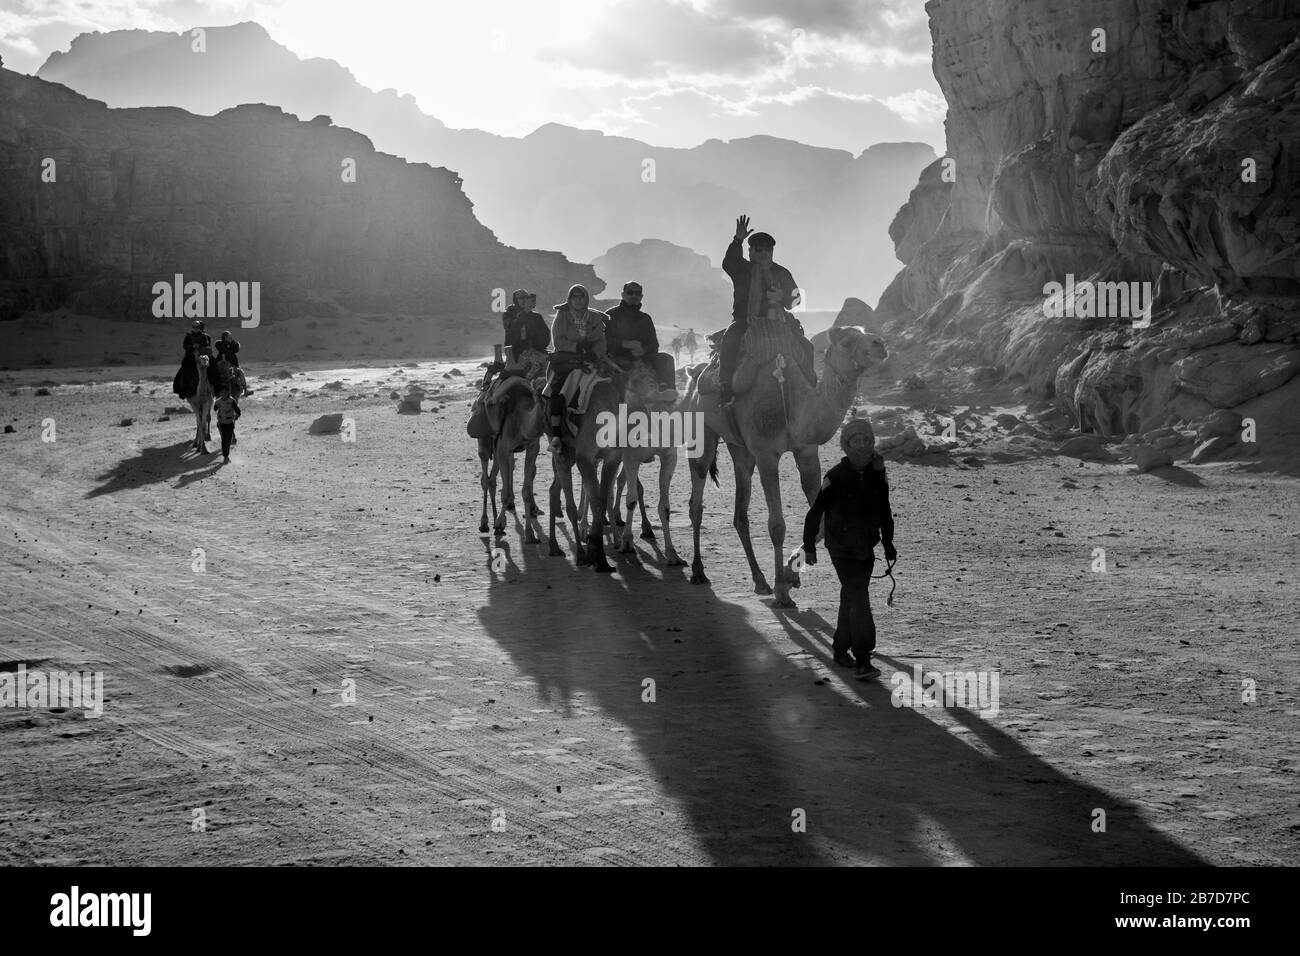 WADI RUM, JORDAN - JANUARY 31, 2020: Impressive sky with sun rays over people riding camels. Black and white image, winter puffy clouds afternoon sky. Desert, Hashemite Kingdom of Jordan Stock Photo